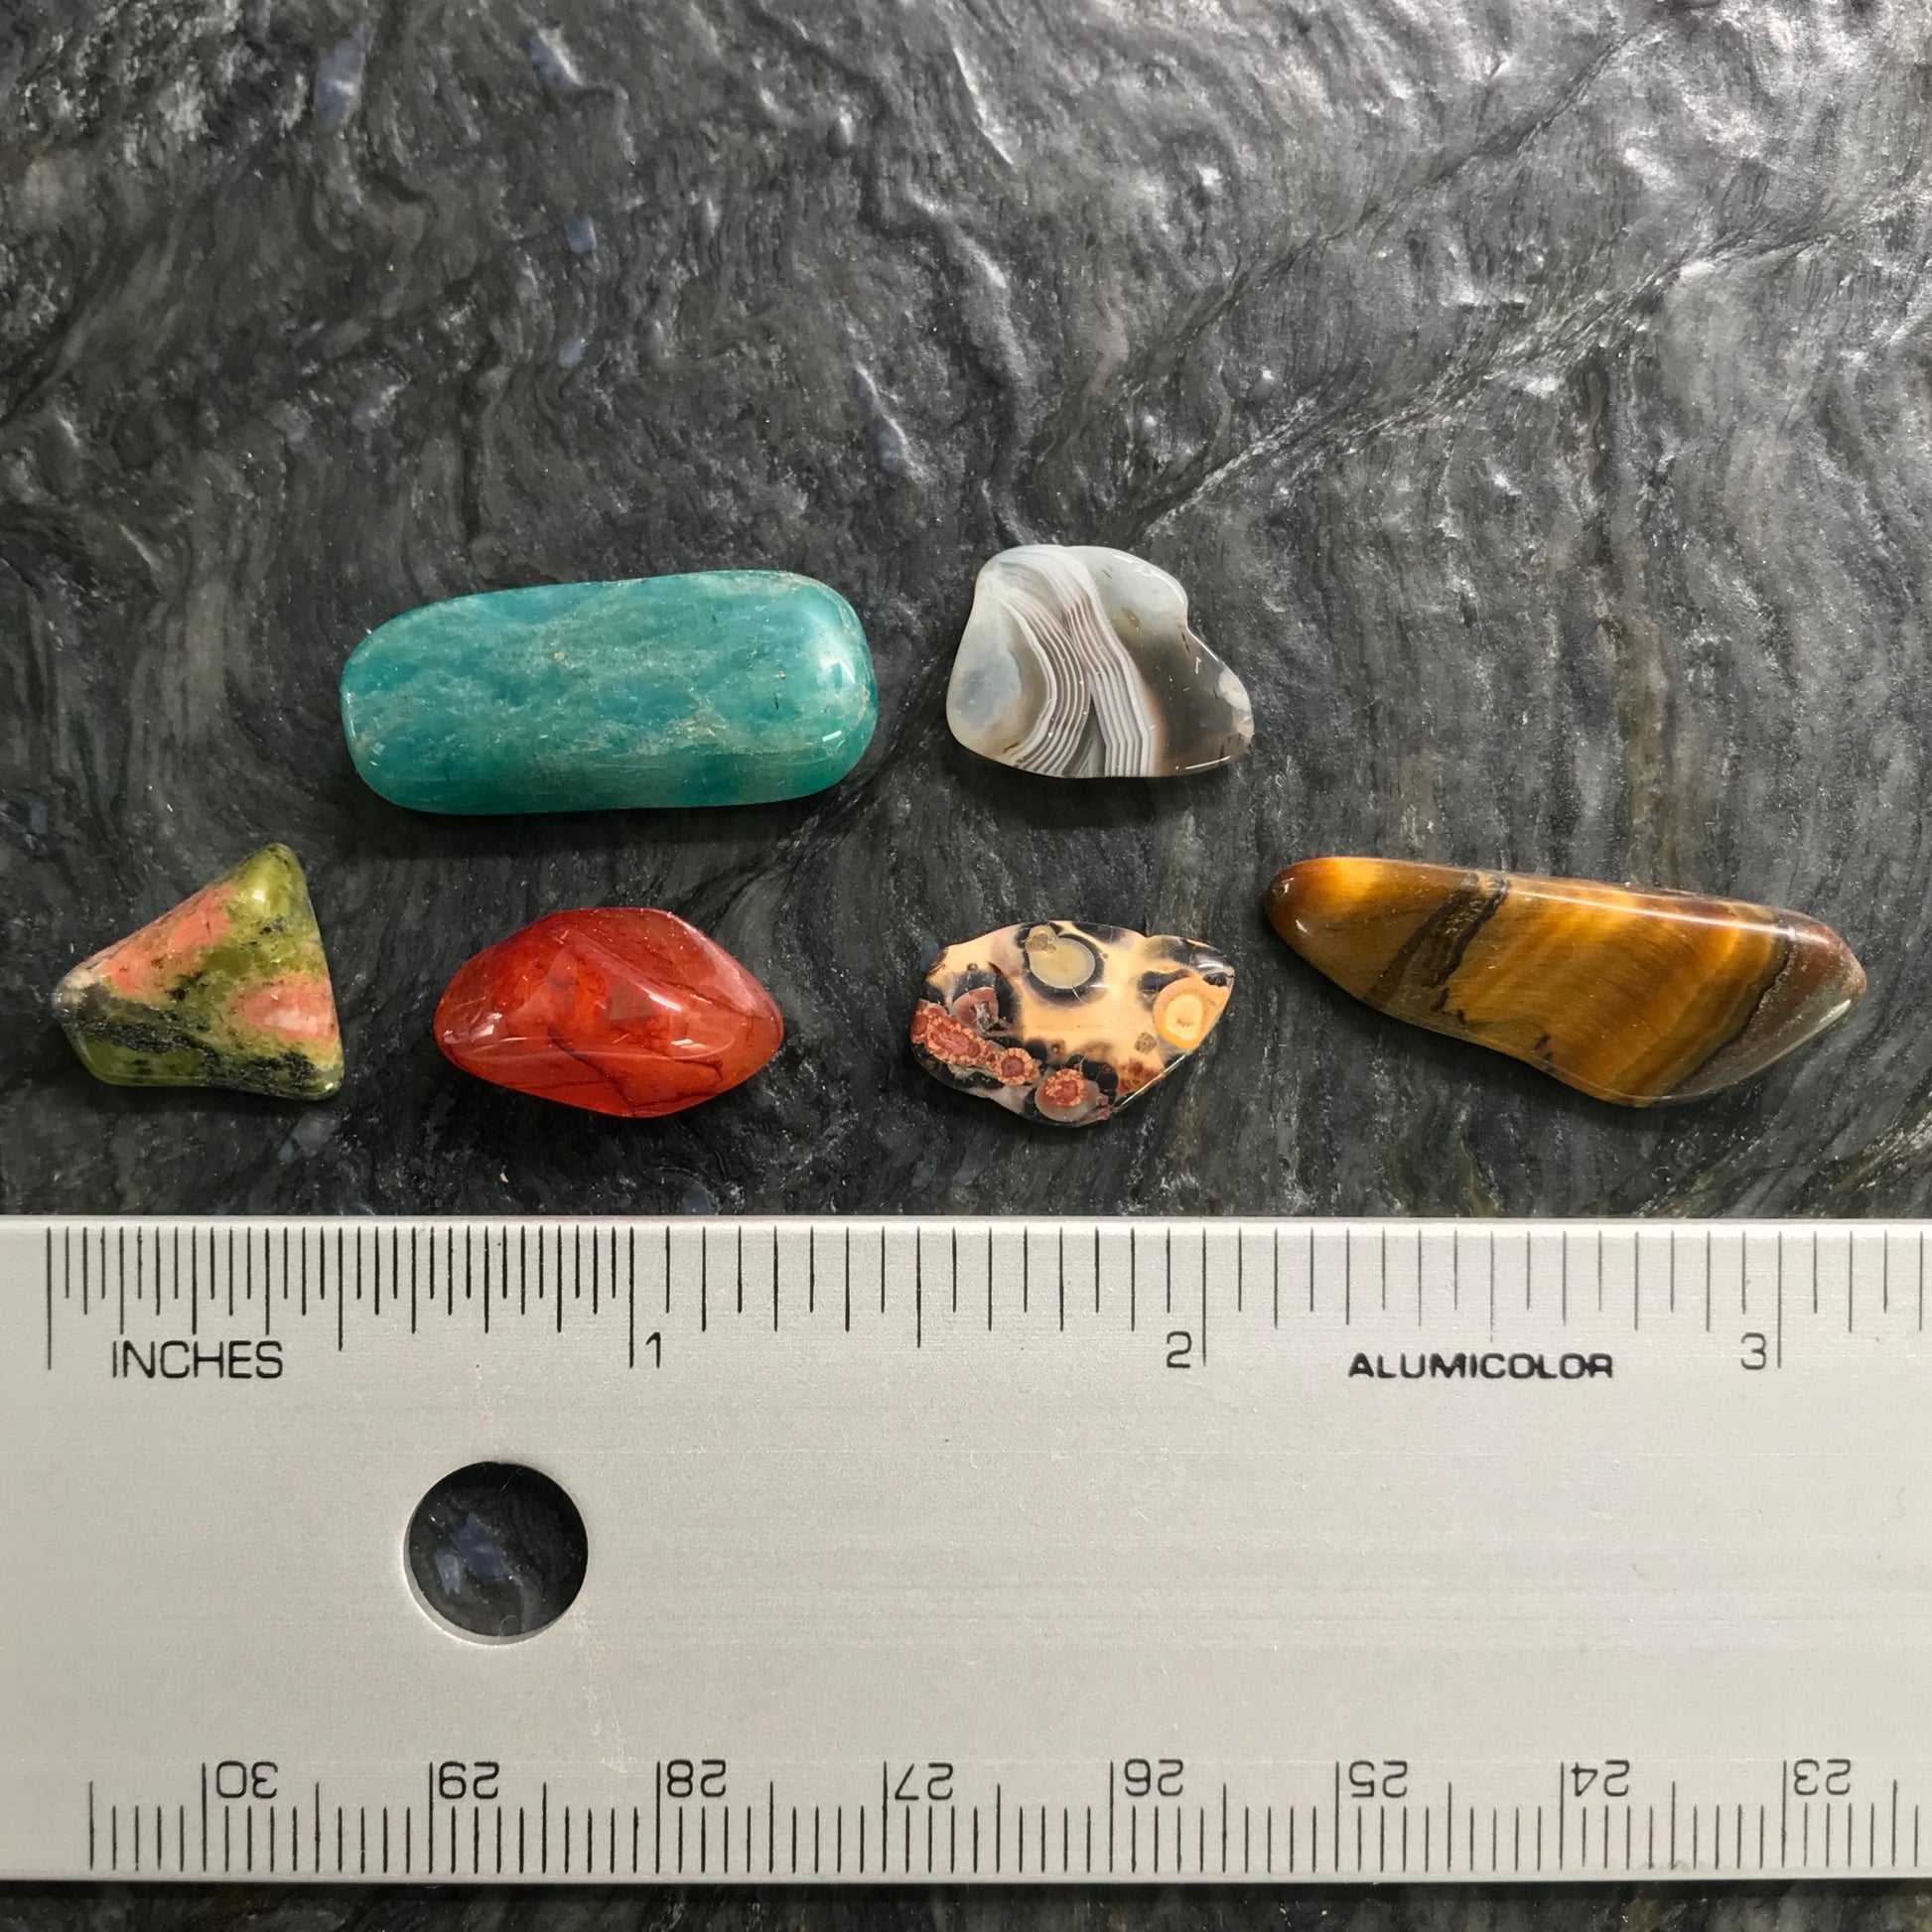 Small tumbled stone chips compared to a ruler.  Average size half an inch to one inch.